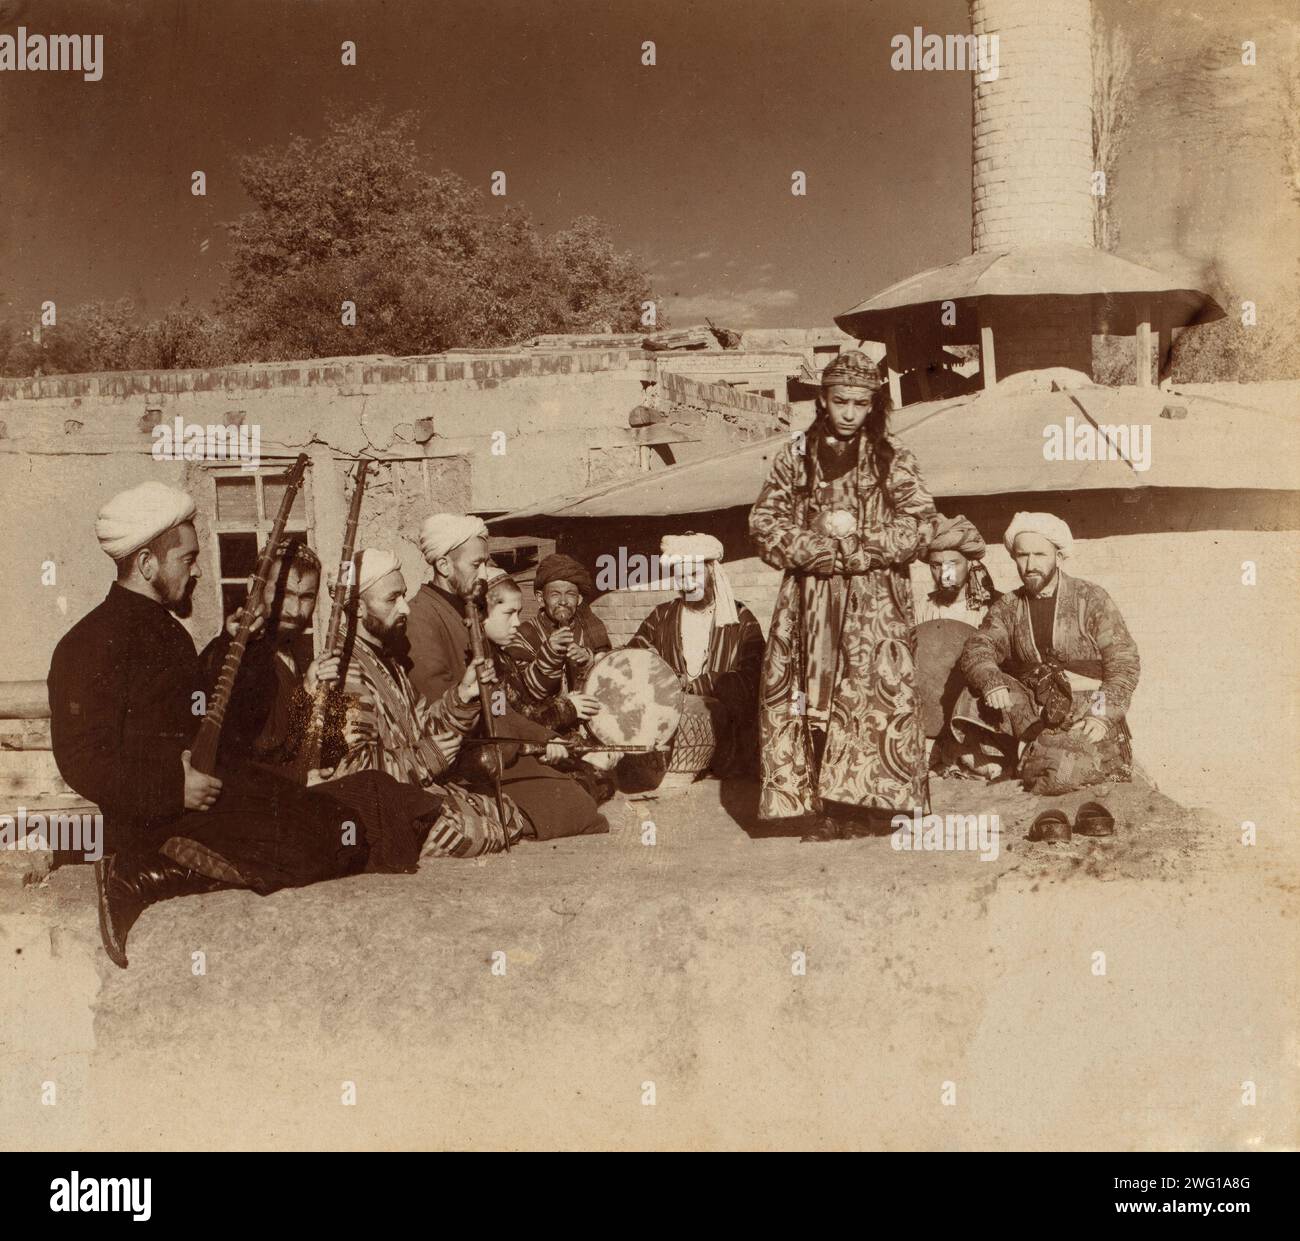 Dance of a bacha [dancing boy], Samarkand, between 1905 and 1915. A group of musicians playing for a bacha (dancing boy). In album: Views in Central Asia, Russian Empire, LOT 10338, no. 150. Stock Photo